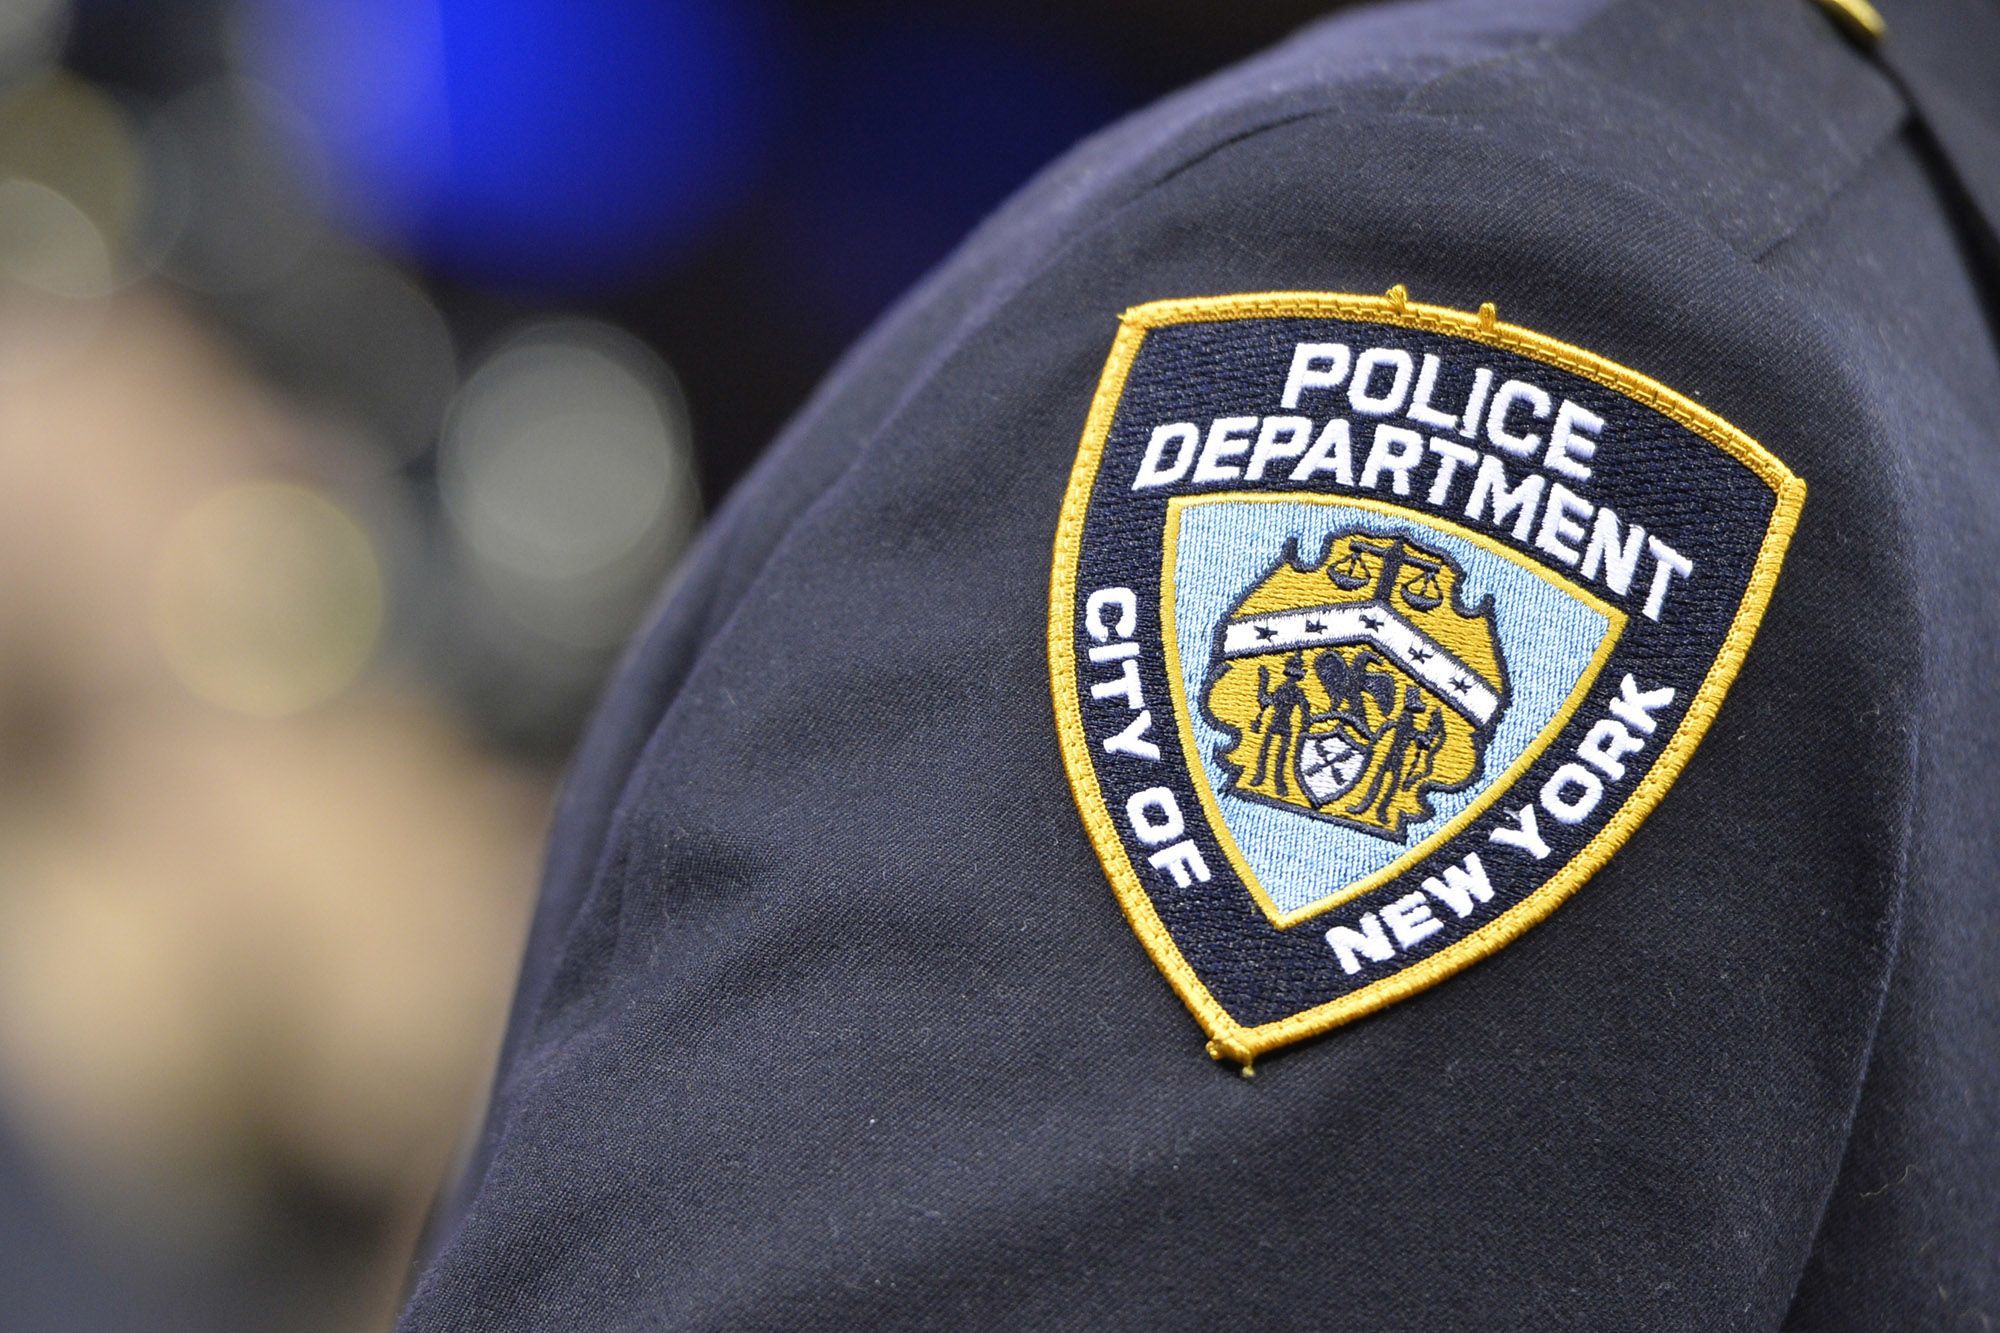 Undercover Staten Island Cop Loses $50K in NYC Taxpayer Money Infiltrating Illegal Poker Games